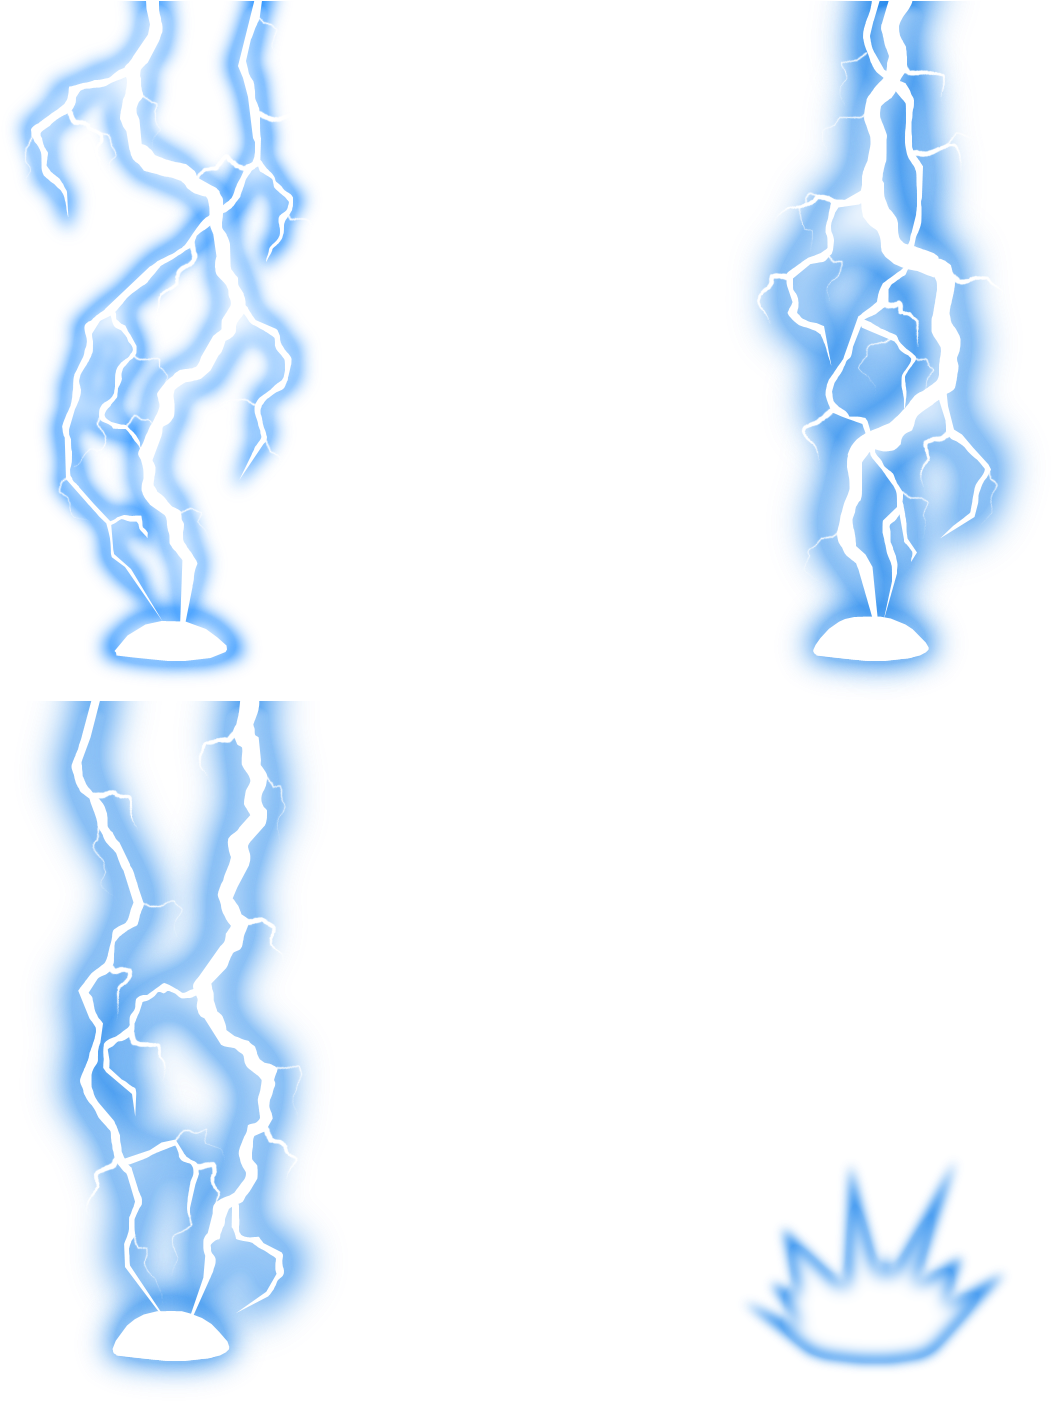 Blue Lightning Effects Graphic PNG